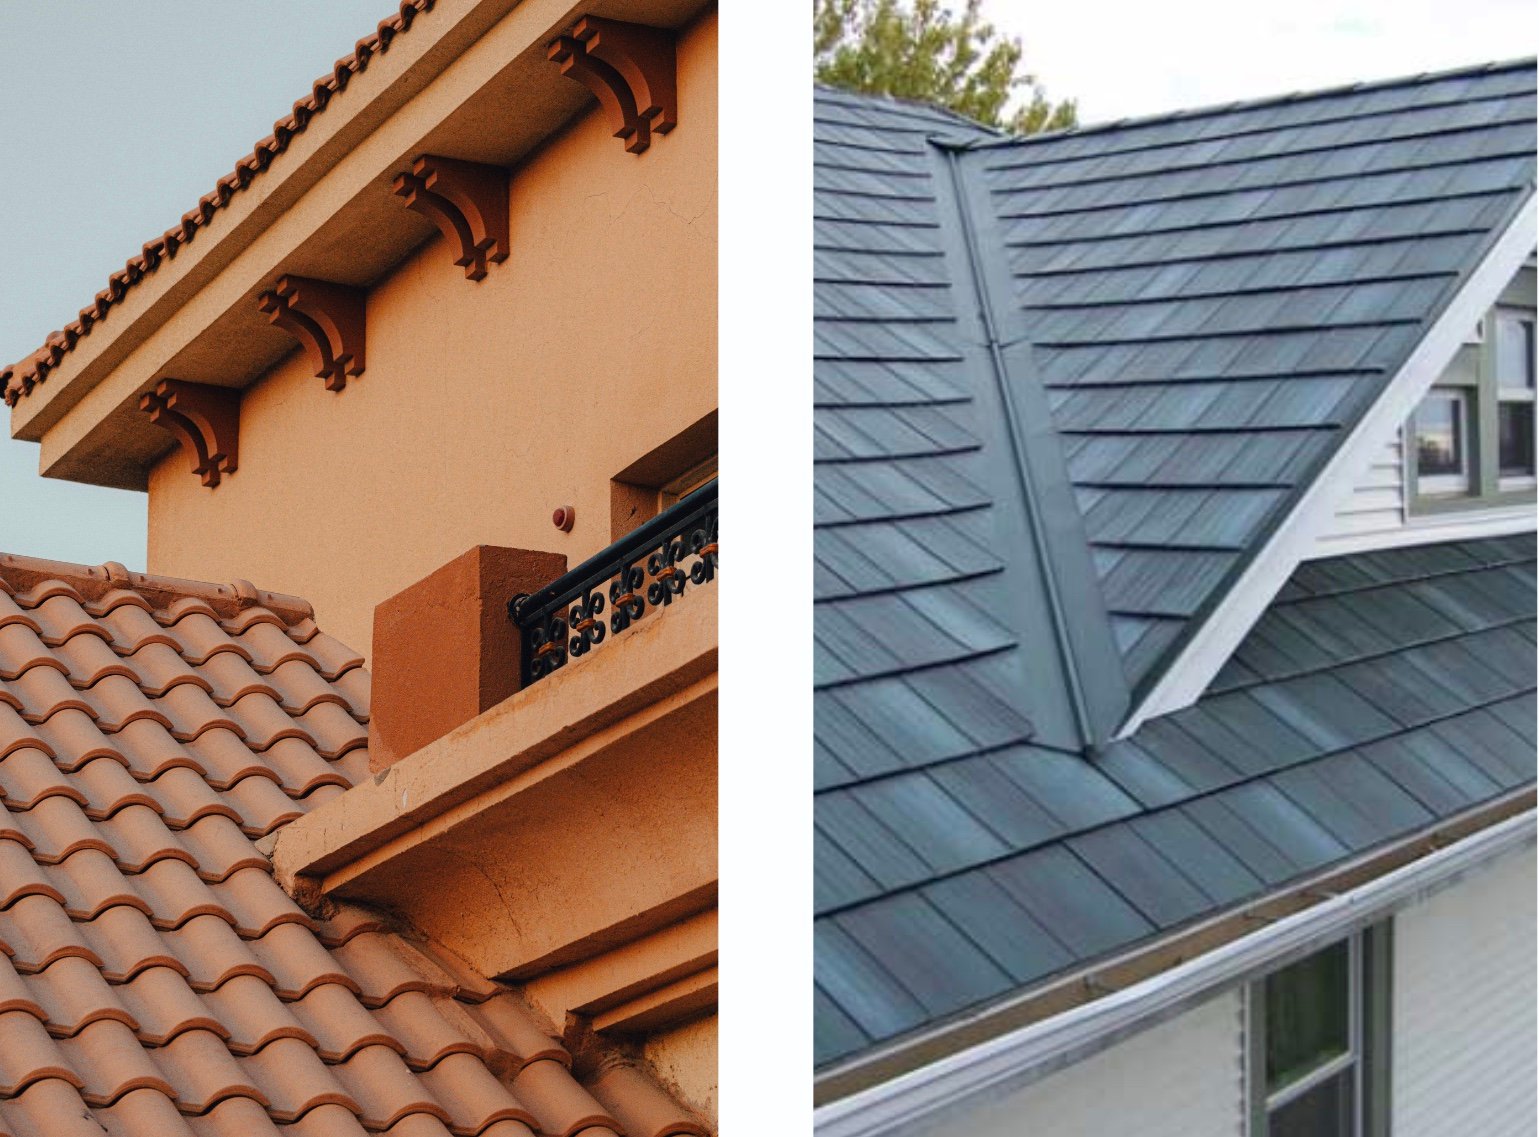 Spanish tile roof and Decra metal roof